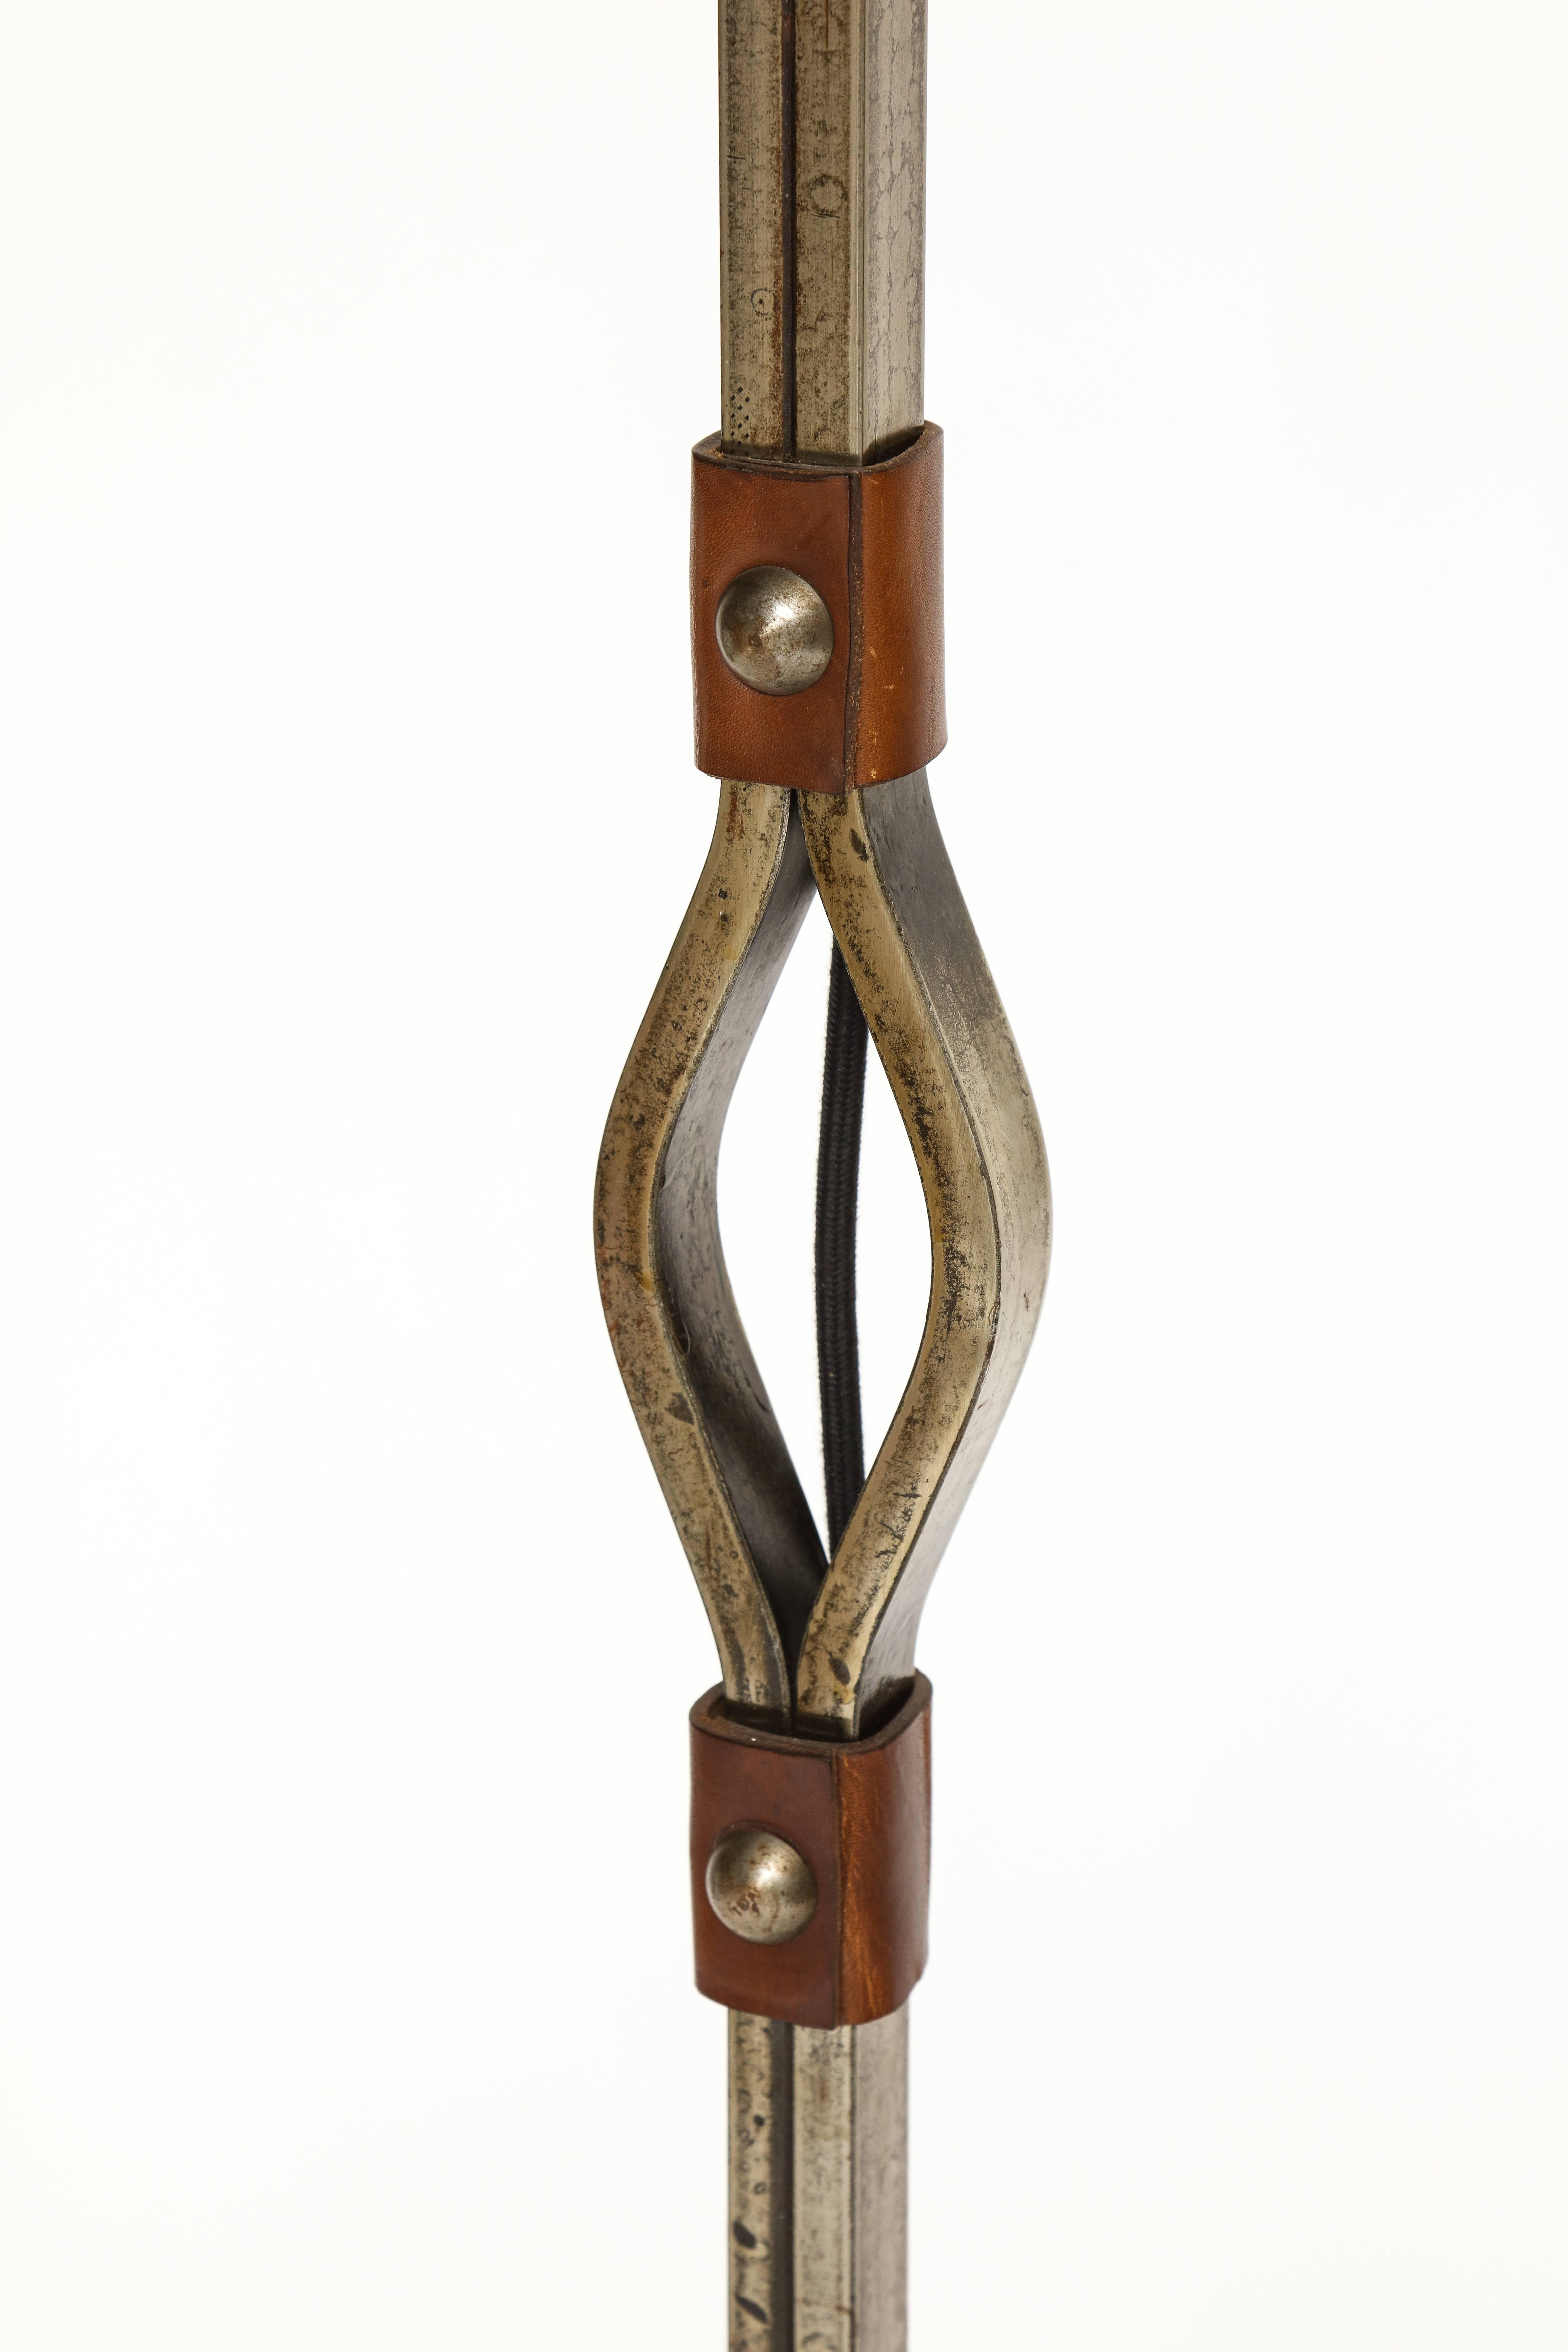 Jacques Adnet iron and leather horseshoe lamp, 1950s-1960s, France.

Beautiful patina to the iron and leather. The lamp is very heavy. Linen cord and black paper shade. 

Measures: Height: 65 inches,
width at bottom: 10 inches,
 Width at